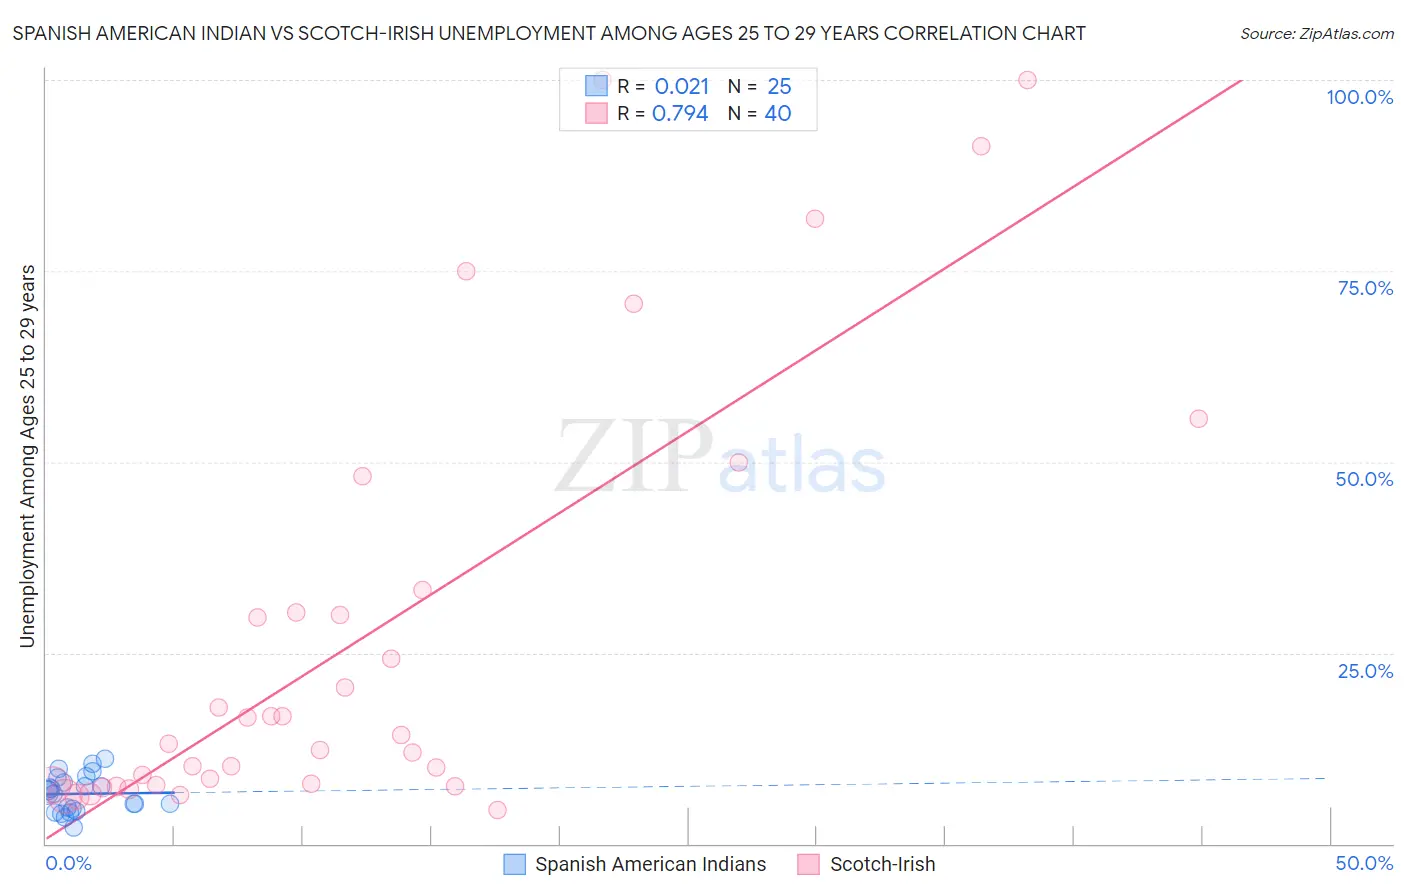 Spanish American Indian vs Scotch-Irish Unemployment Among Ages 25 to 29 years